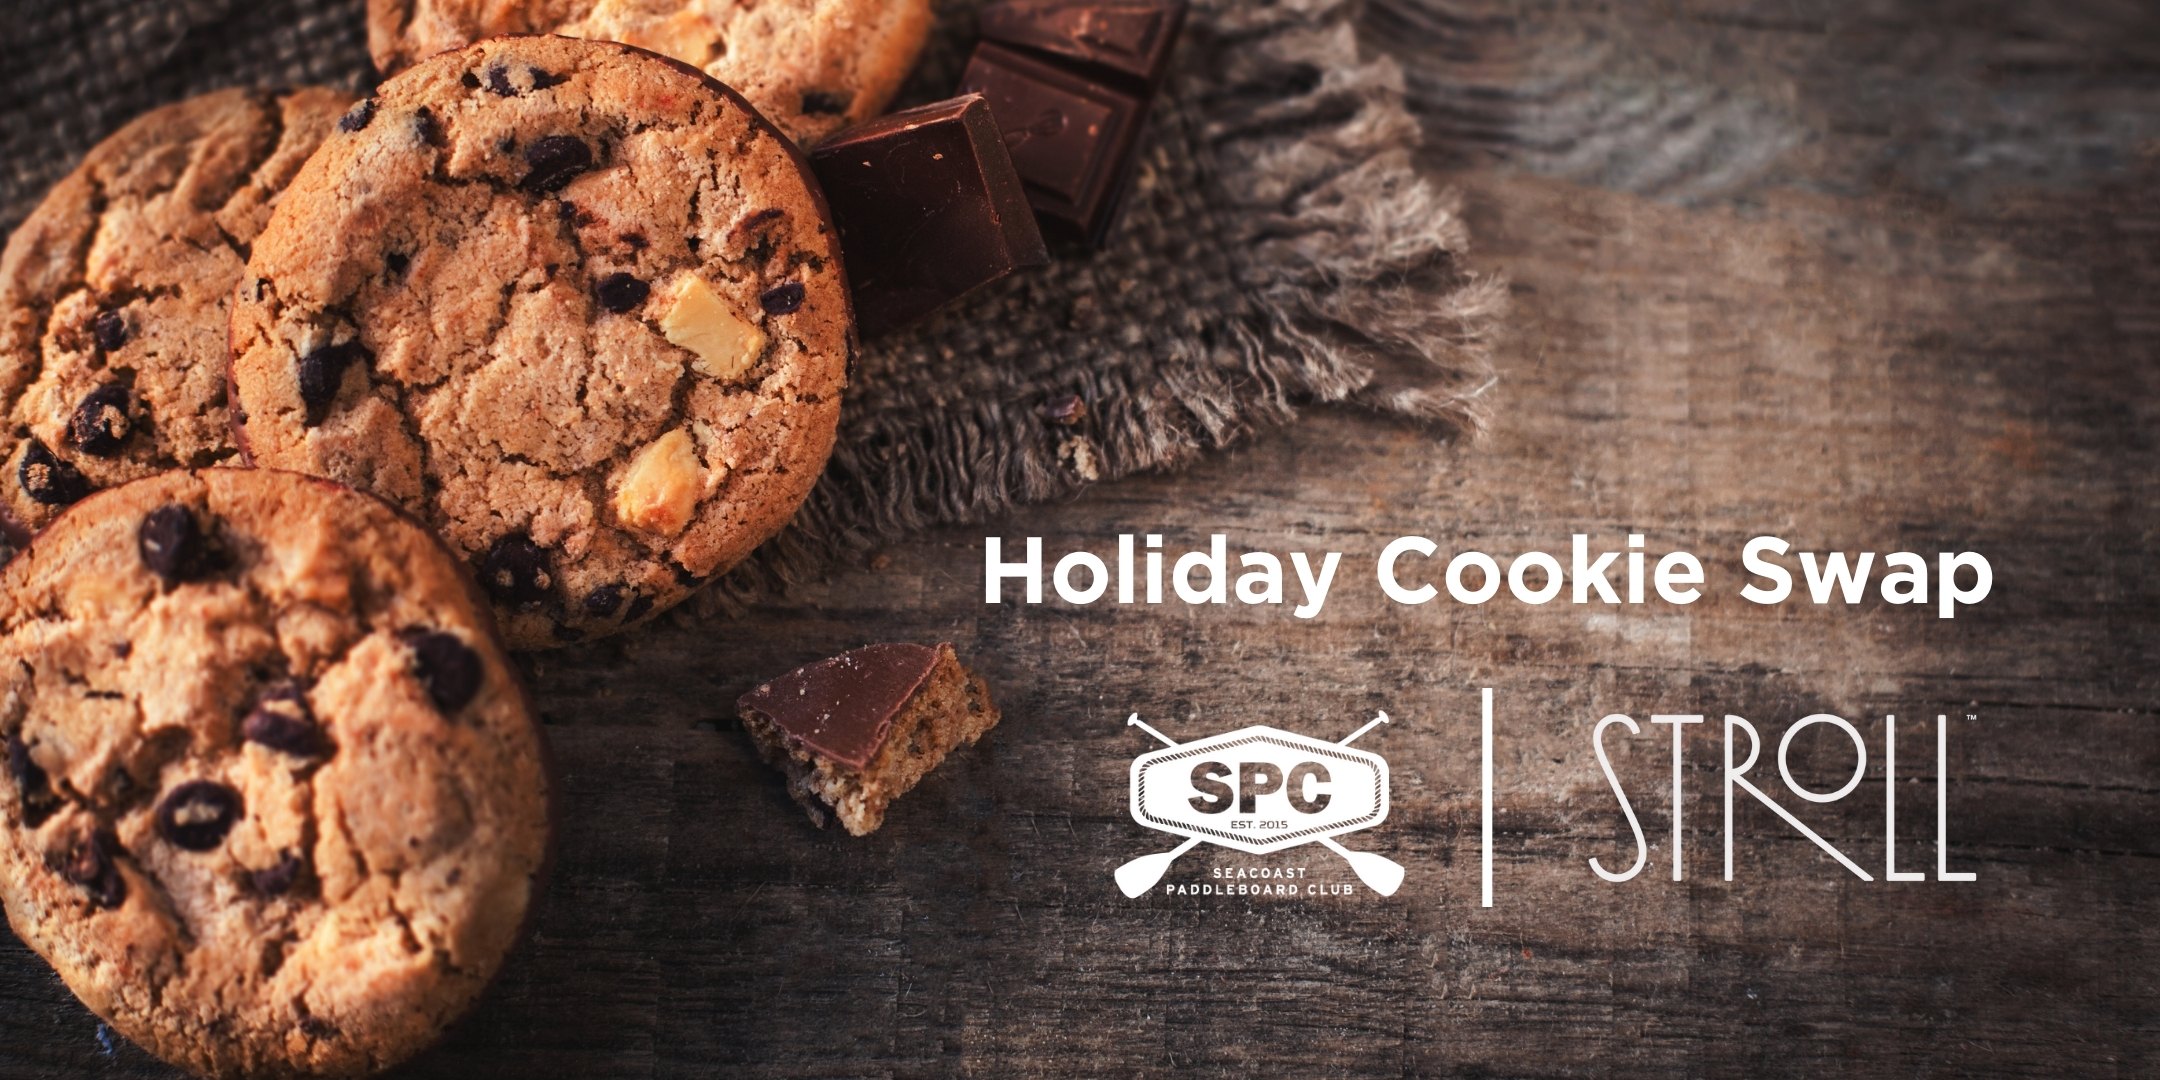 Portsmouth Holiday Cookie Swap